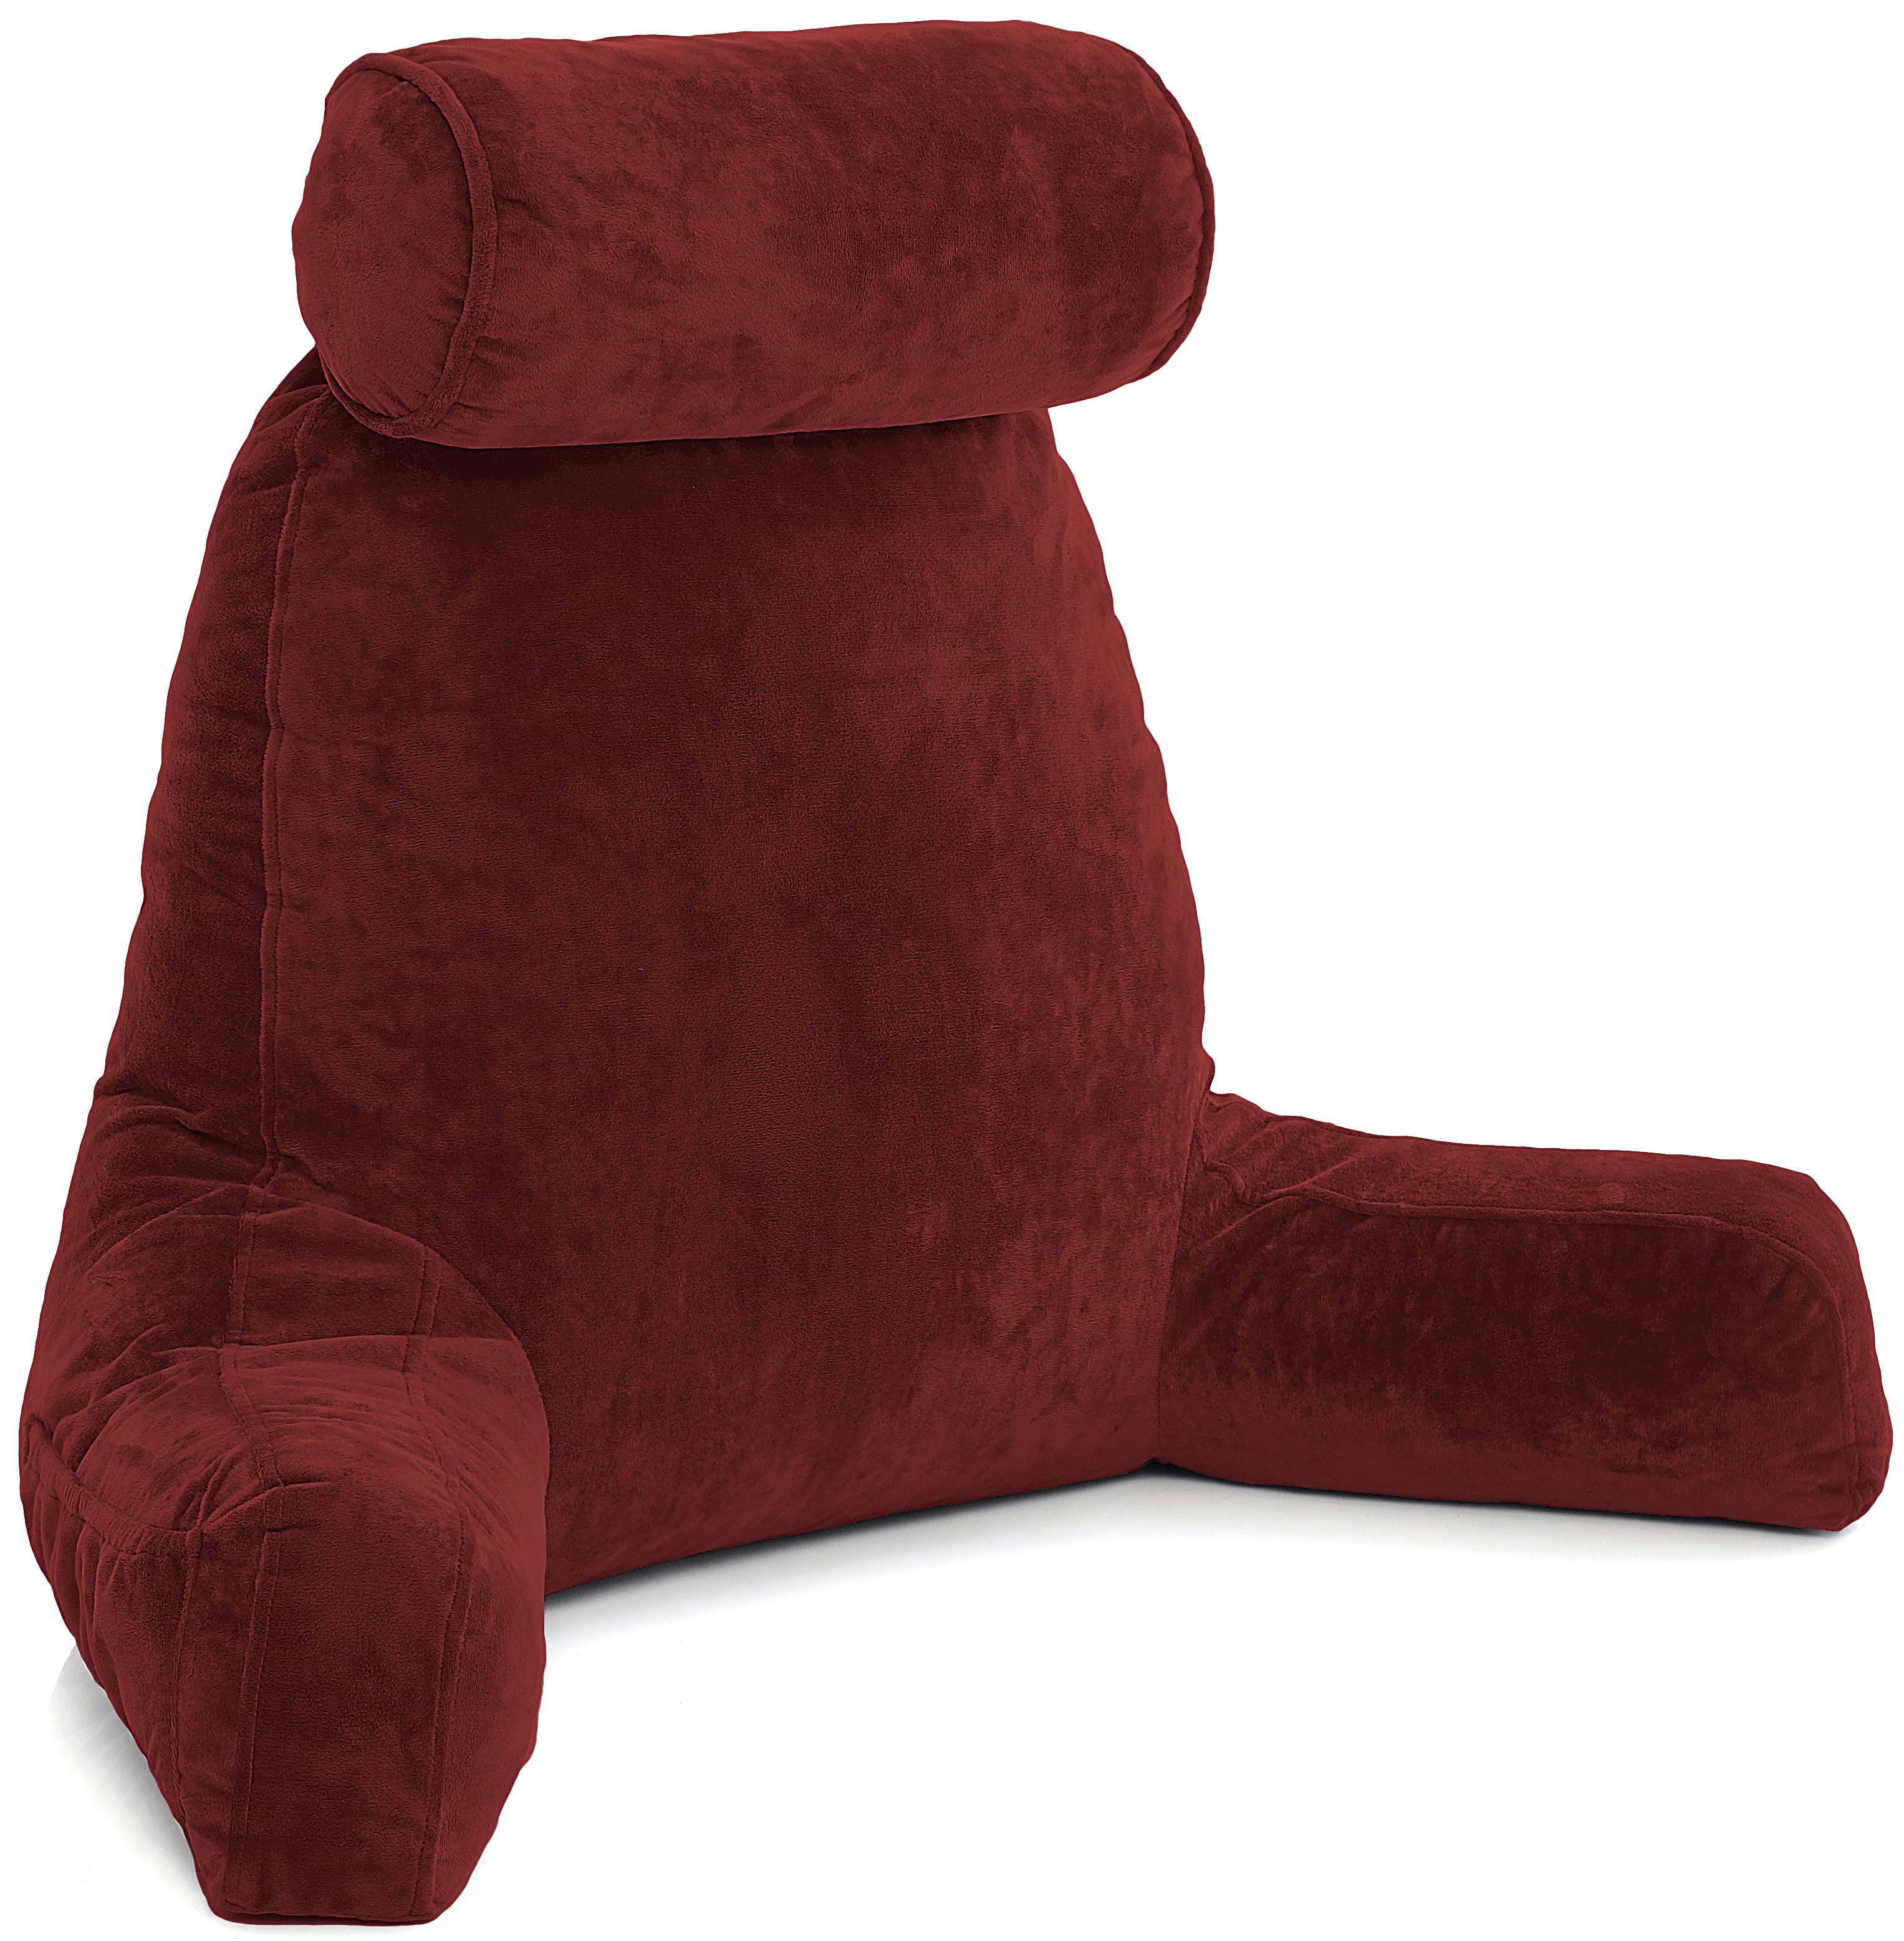 Husband Pillow Maroon Big Reading Bed Rest Pillow With Arms